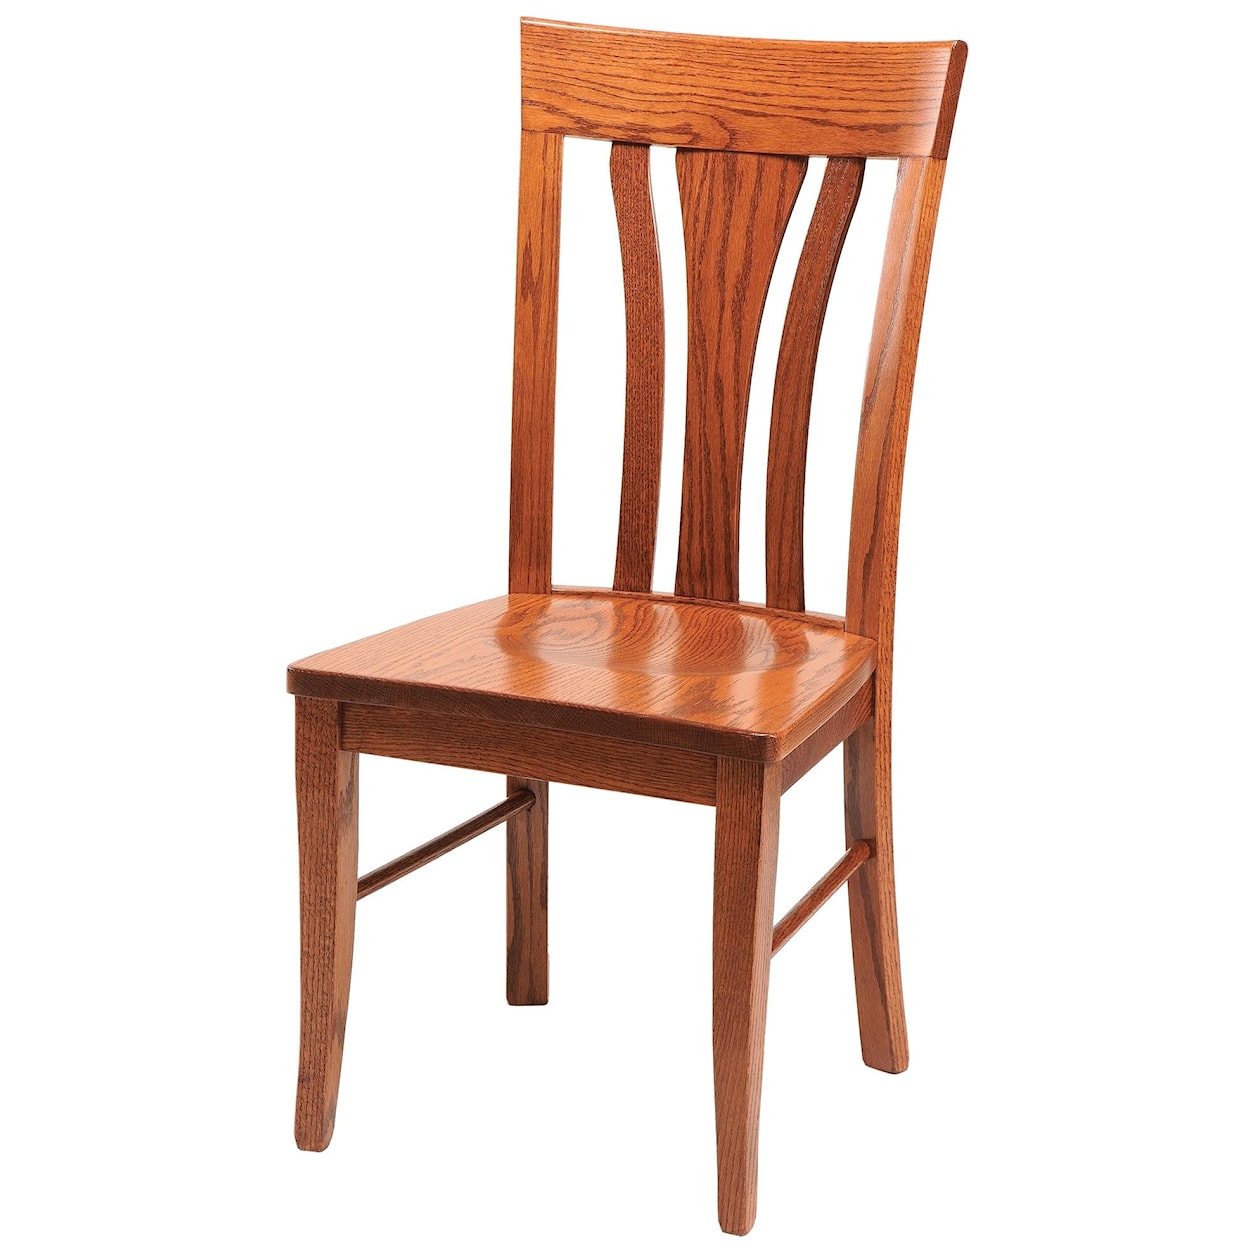 Daniel's Amish Chairs and Barstools Tulip Side Chair